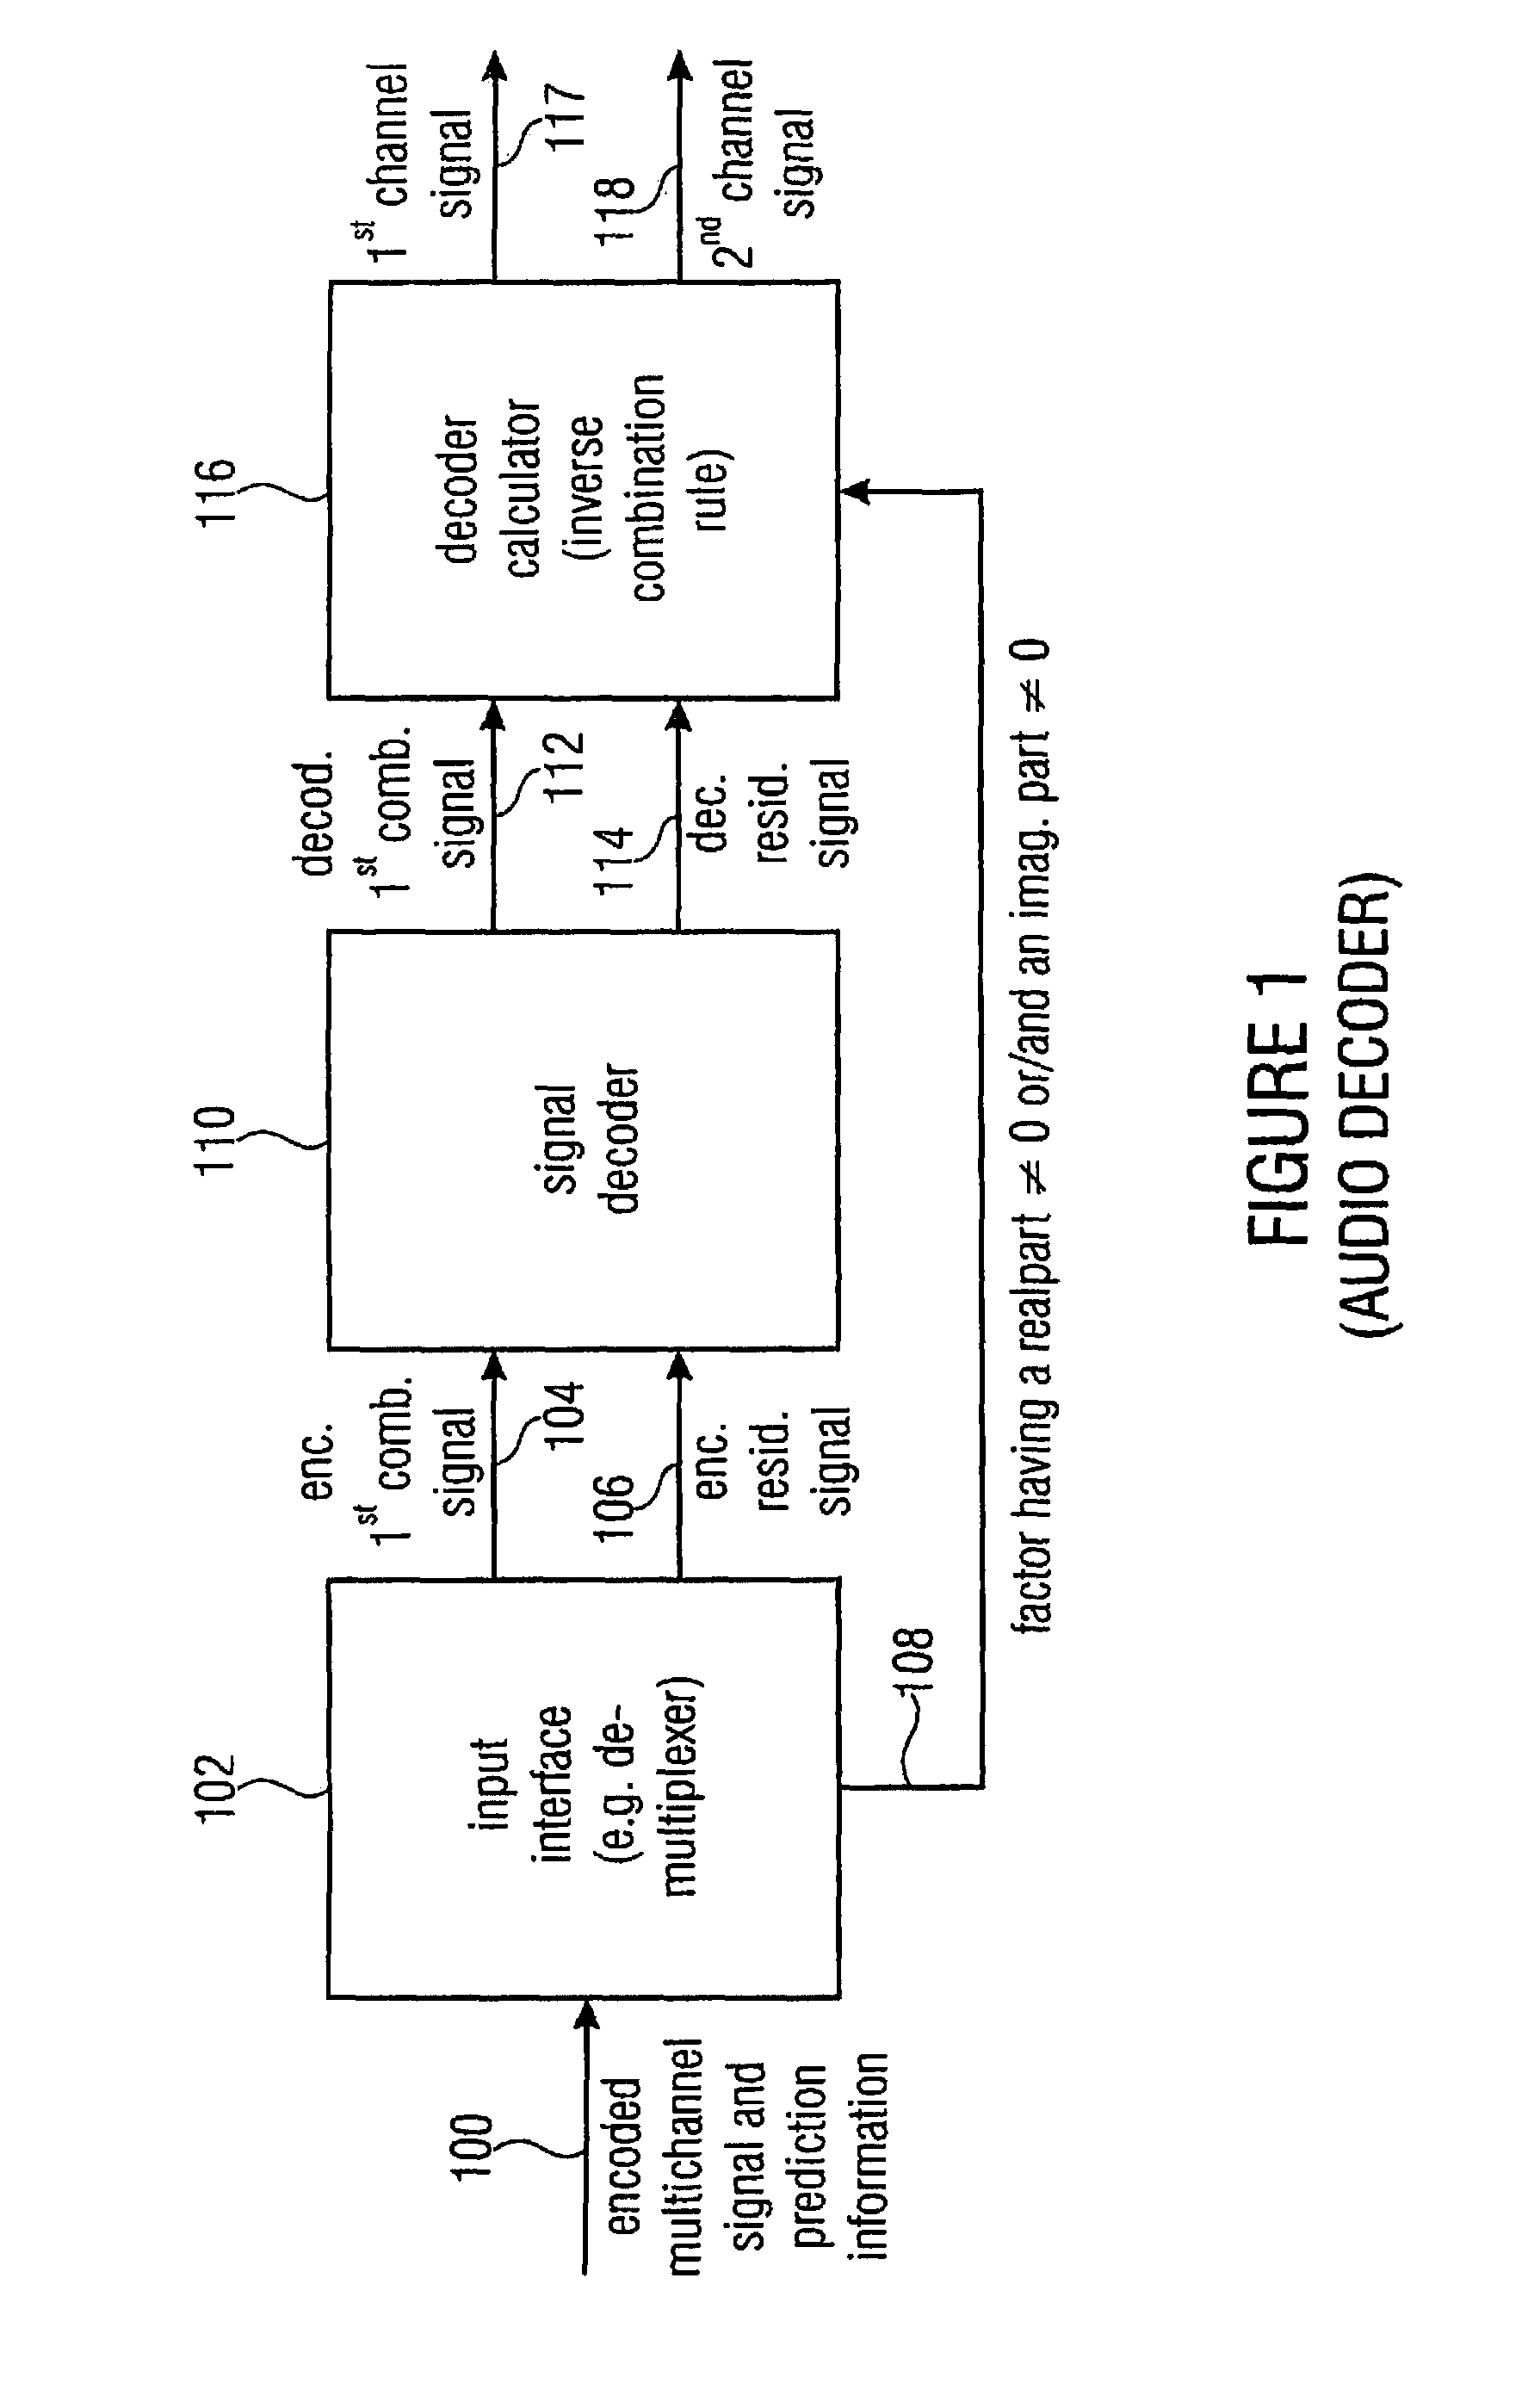 Audio encoder, audio decoder and related methods for processing multi-channel audio signals using complex prediction